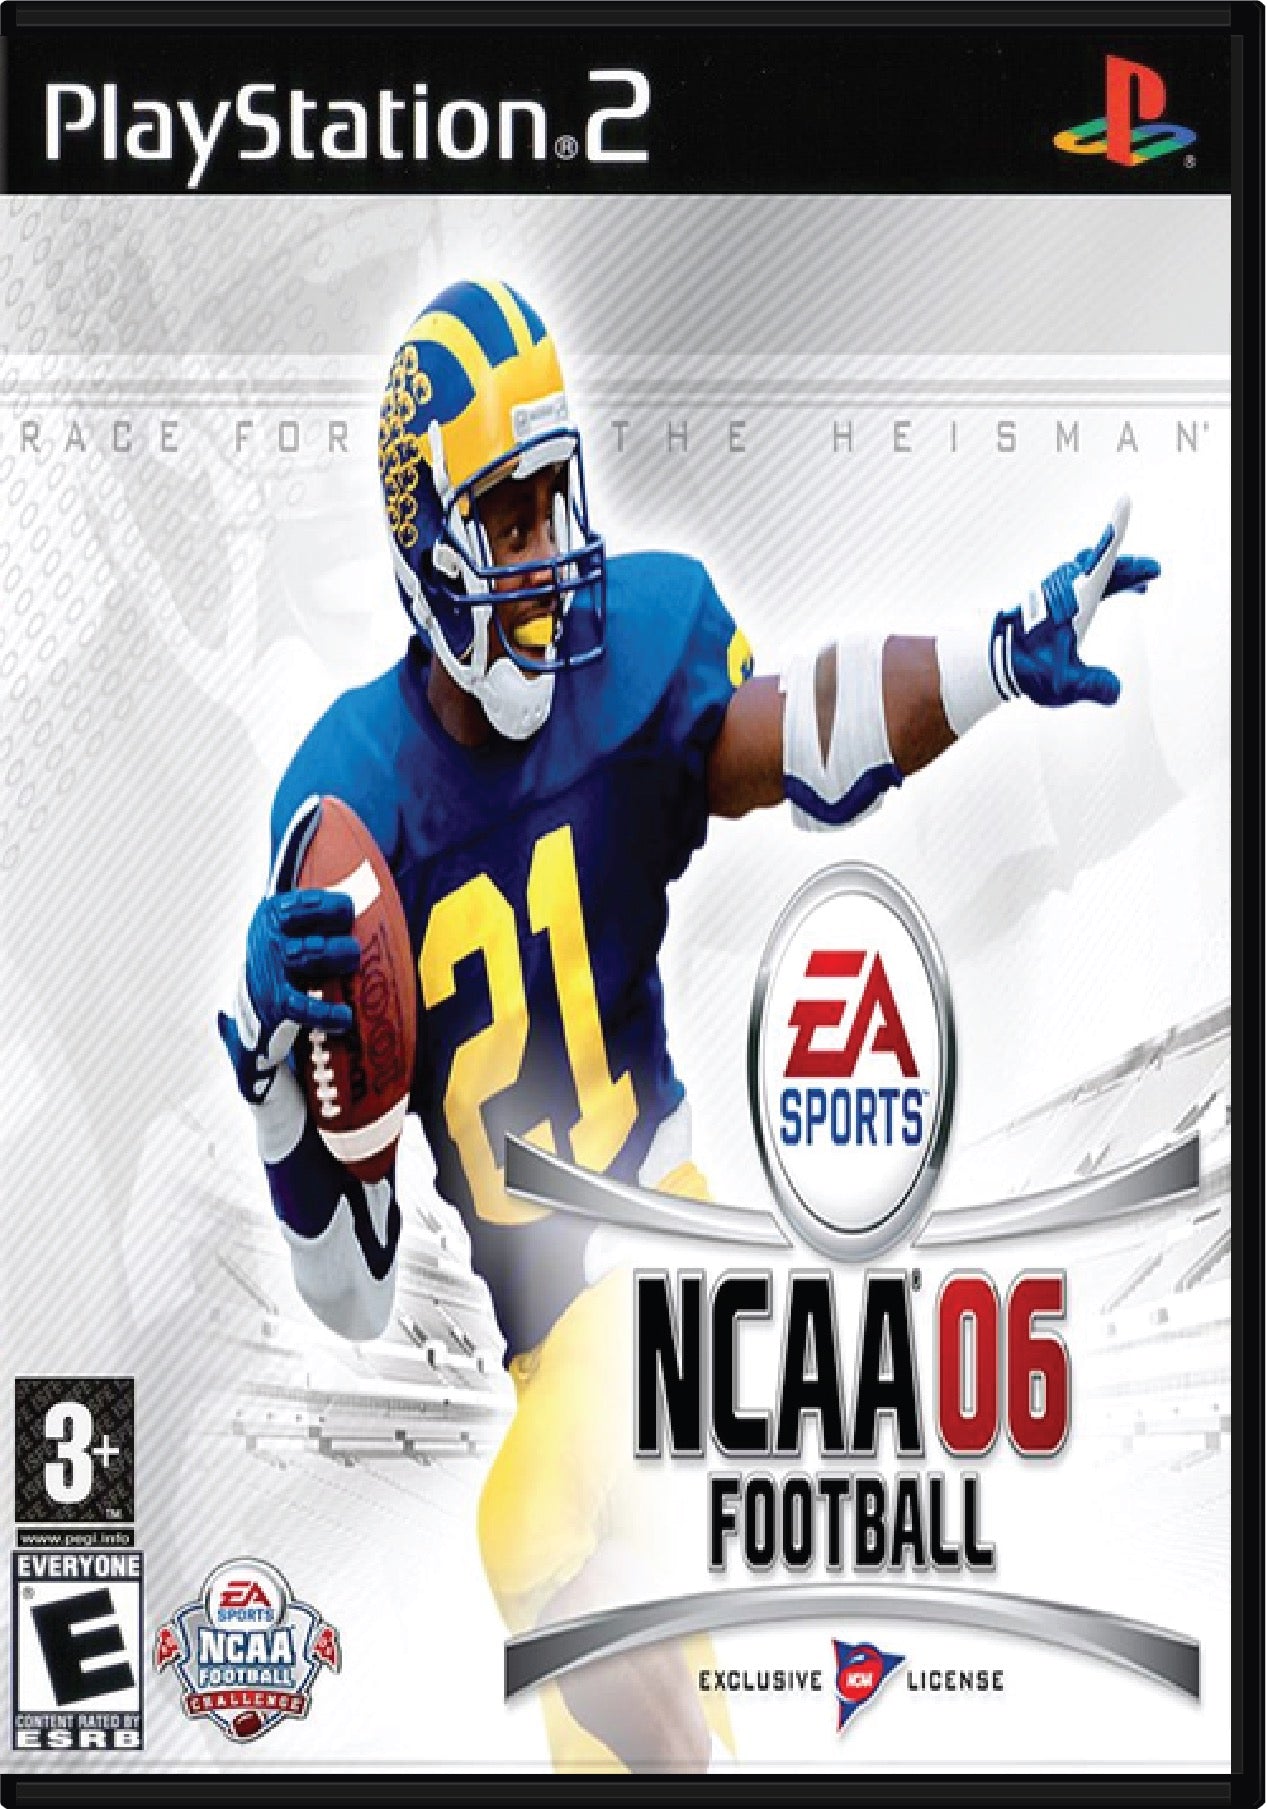 NCAA Football 06 Cover Art and Product Photo